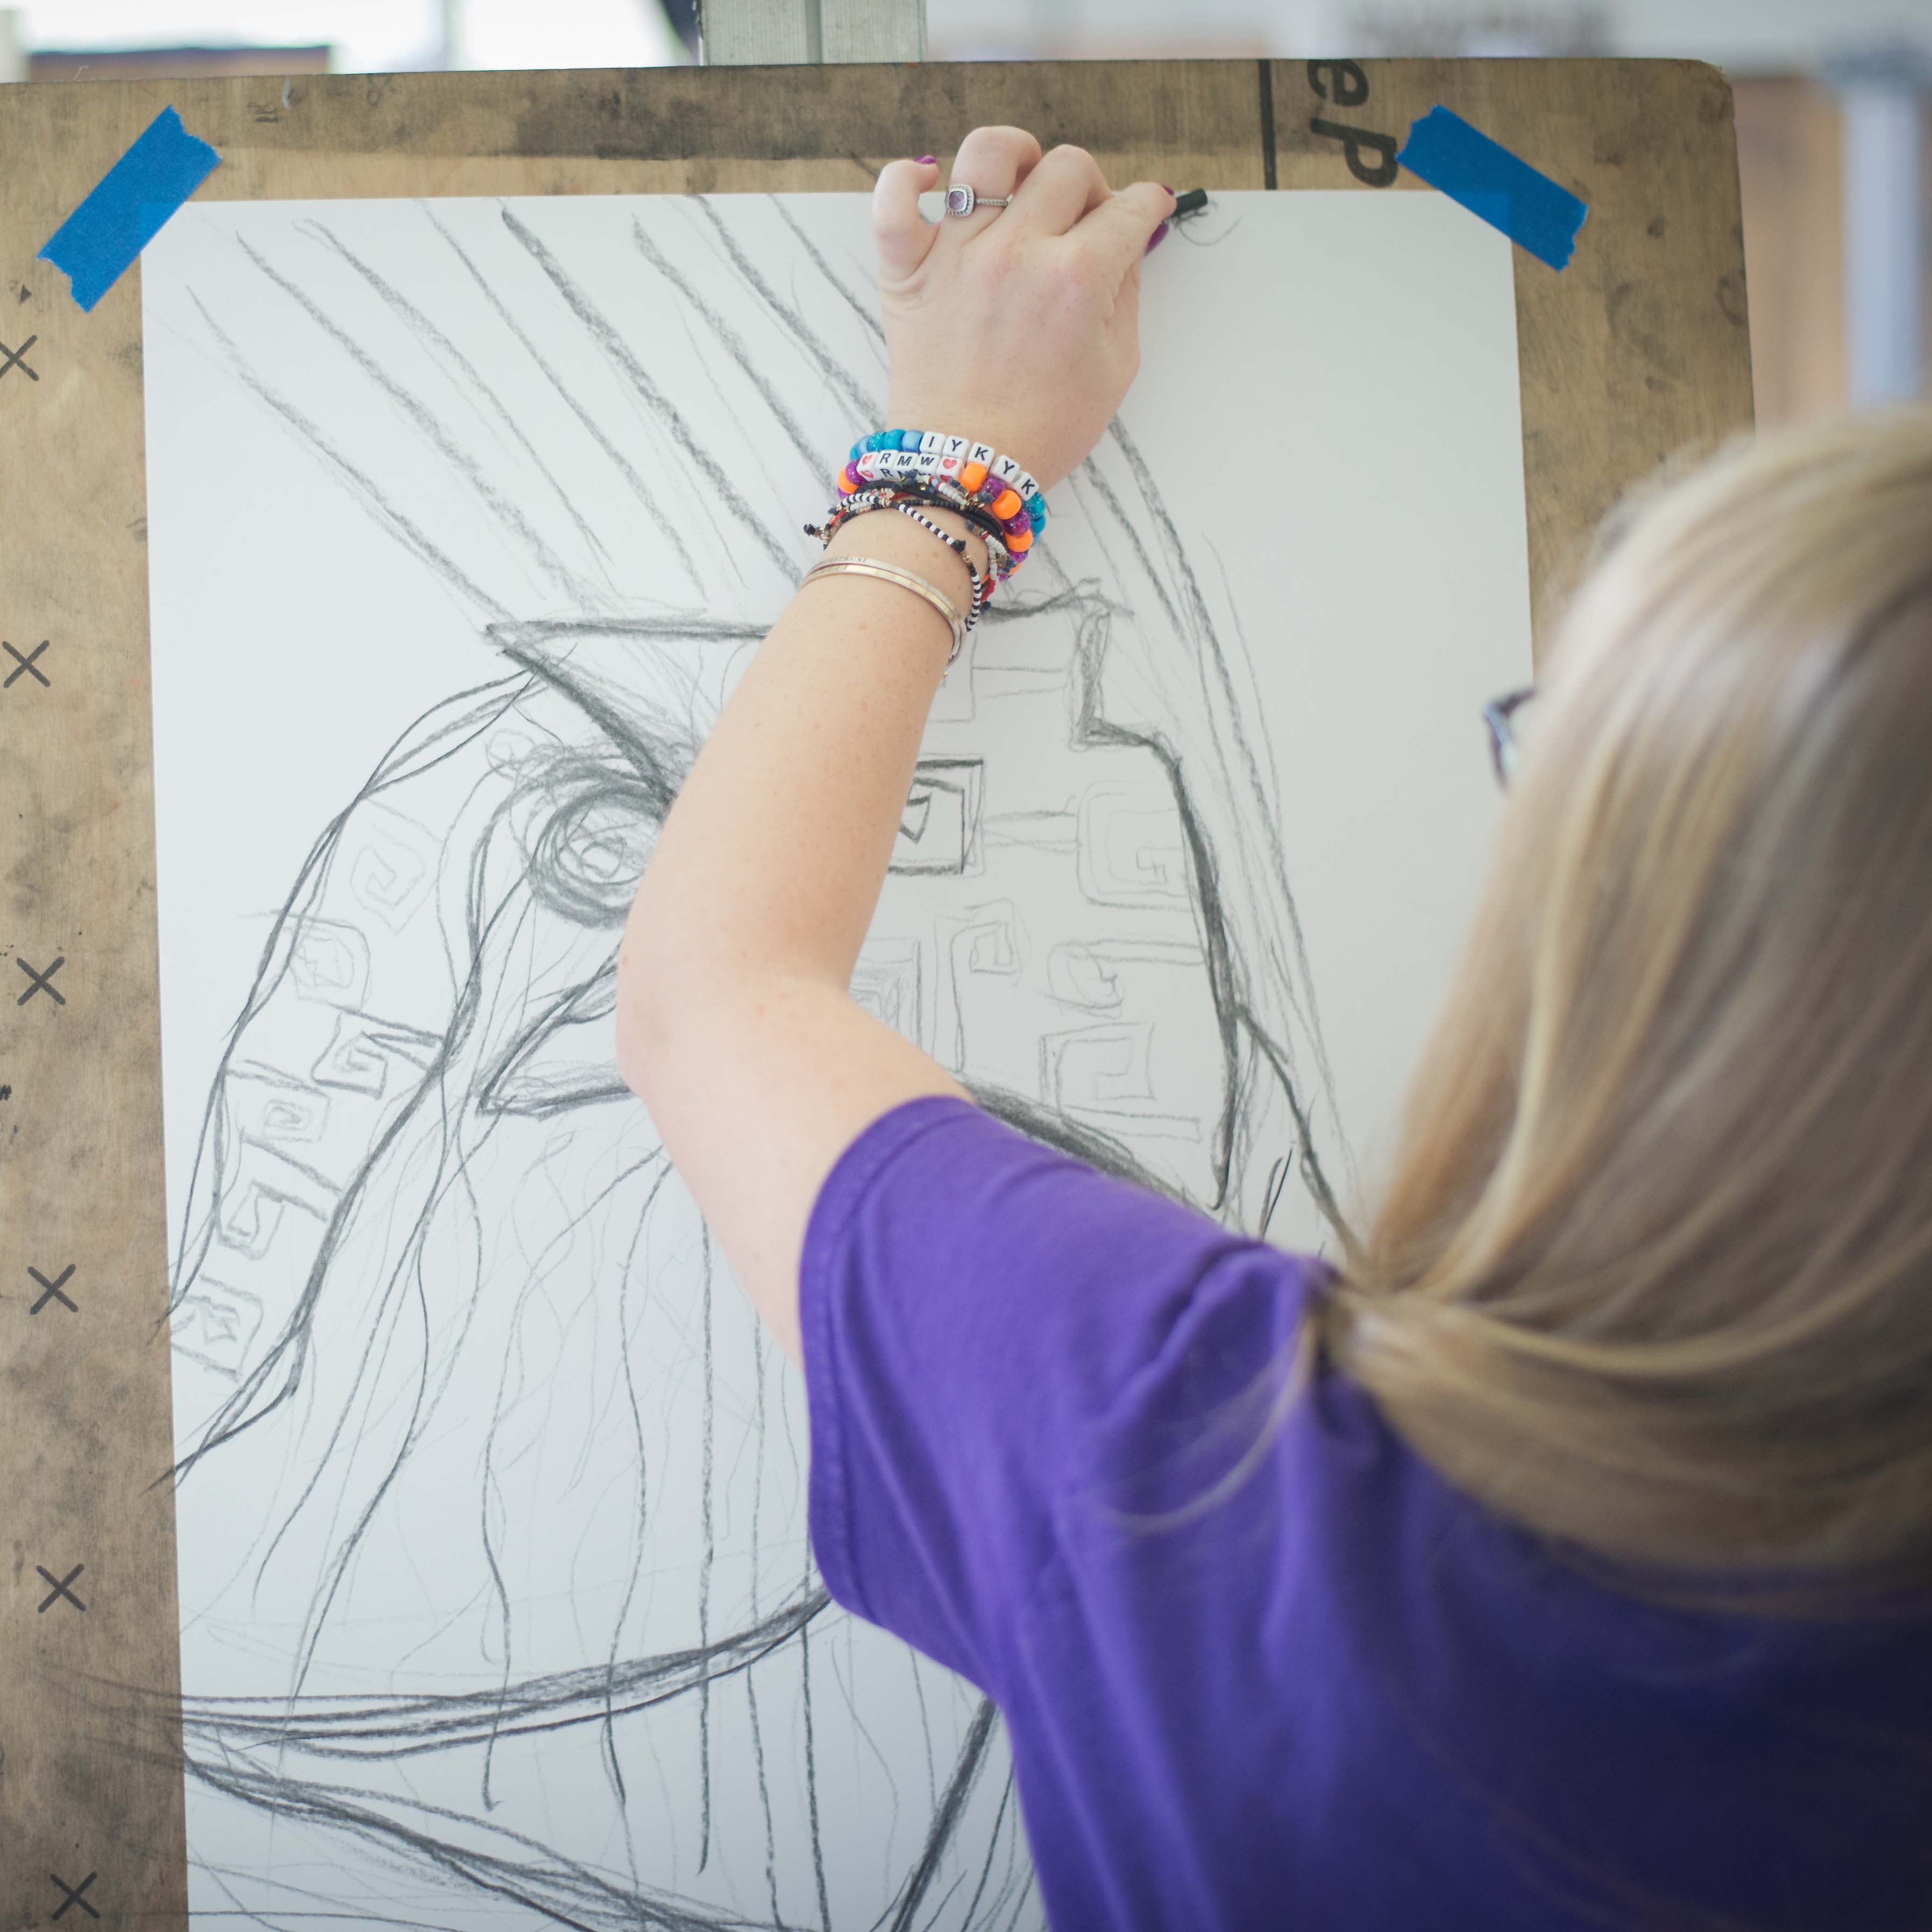 A student sketches on paper taped to an easel